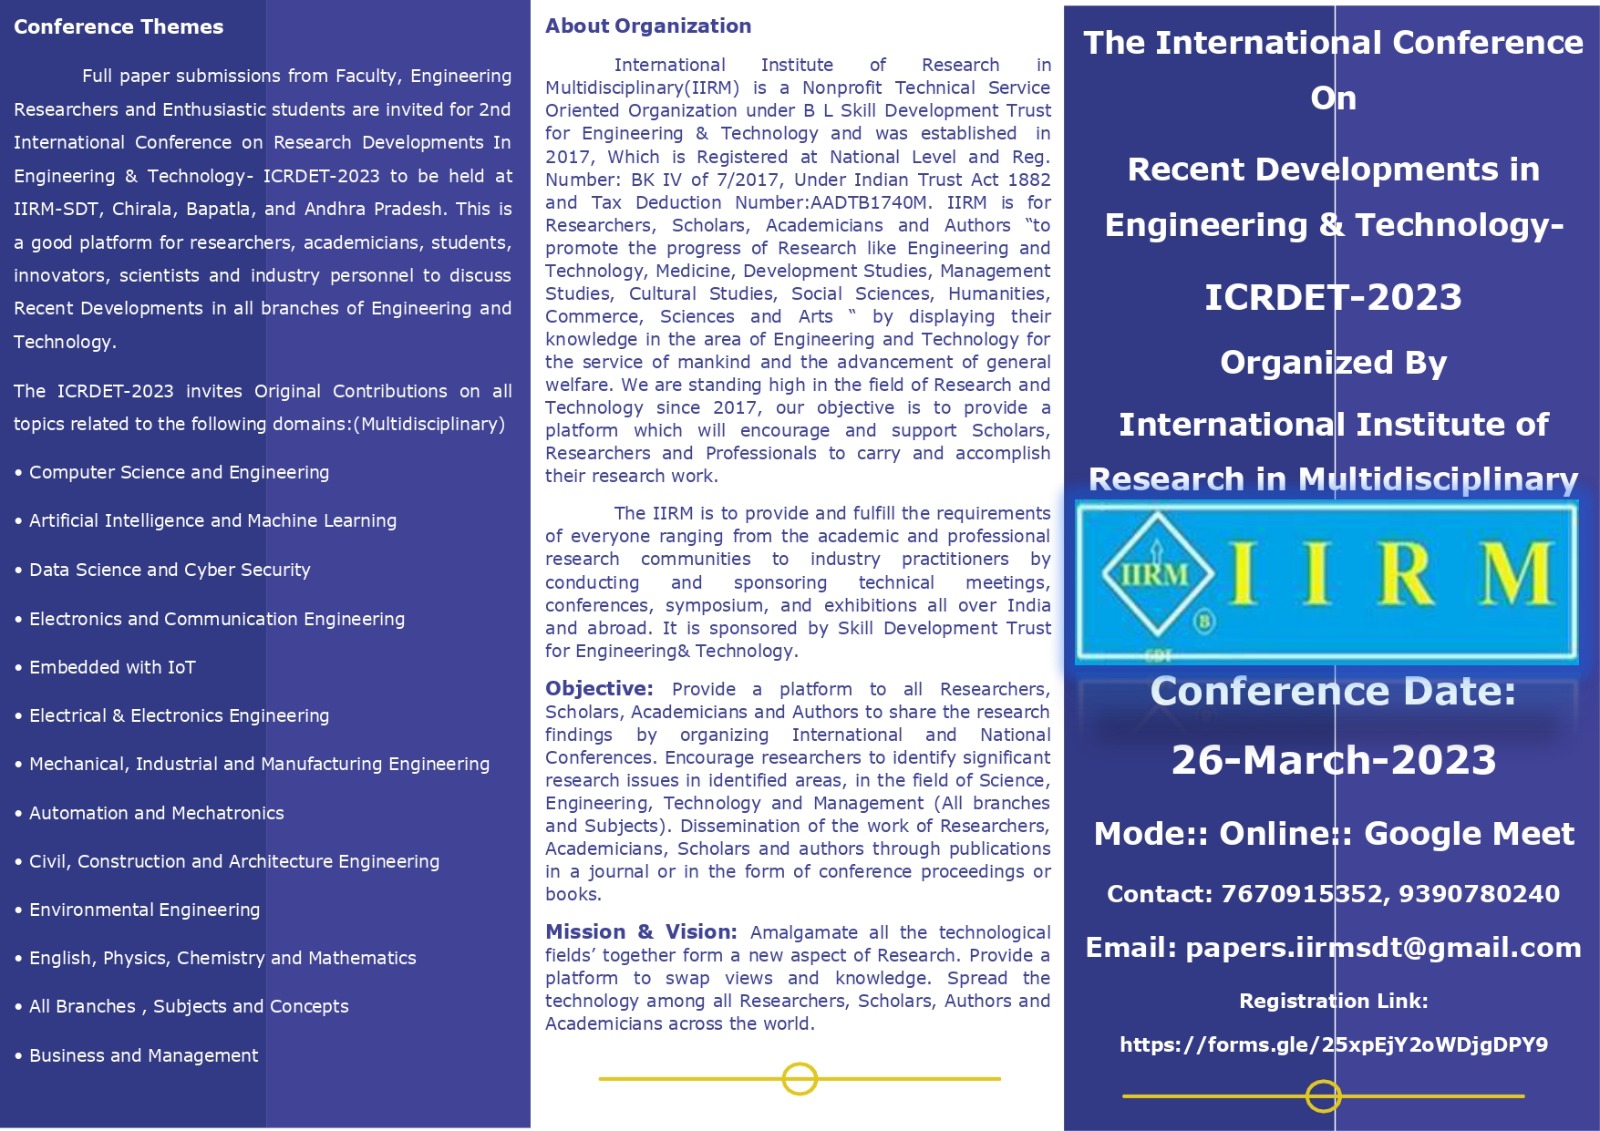 The International Conference On Recent Developments in Engineering and Technology ICRDET 2023